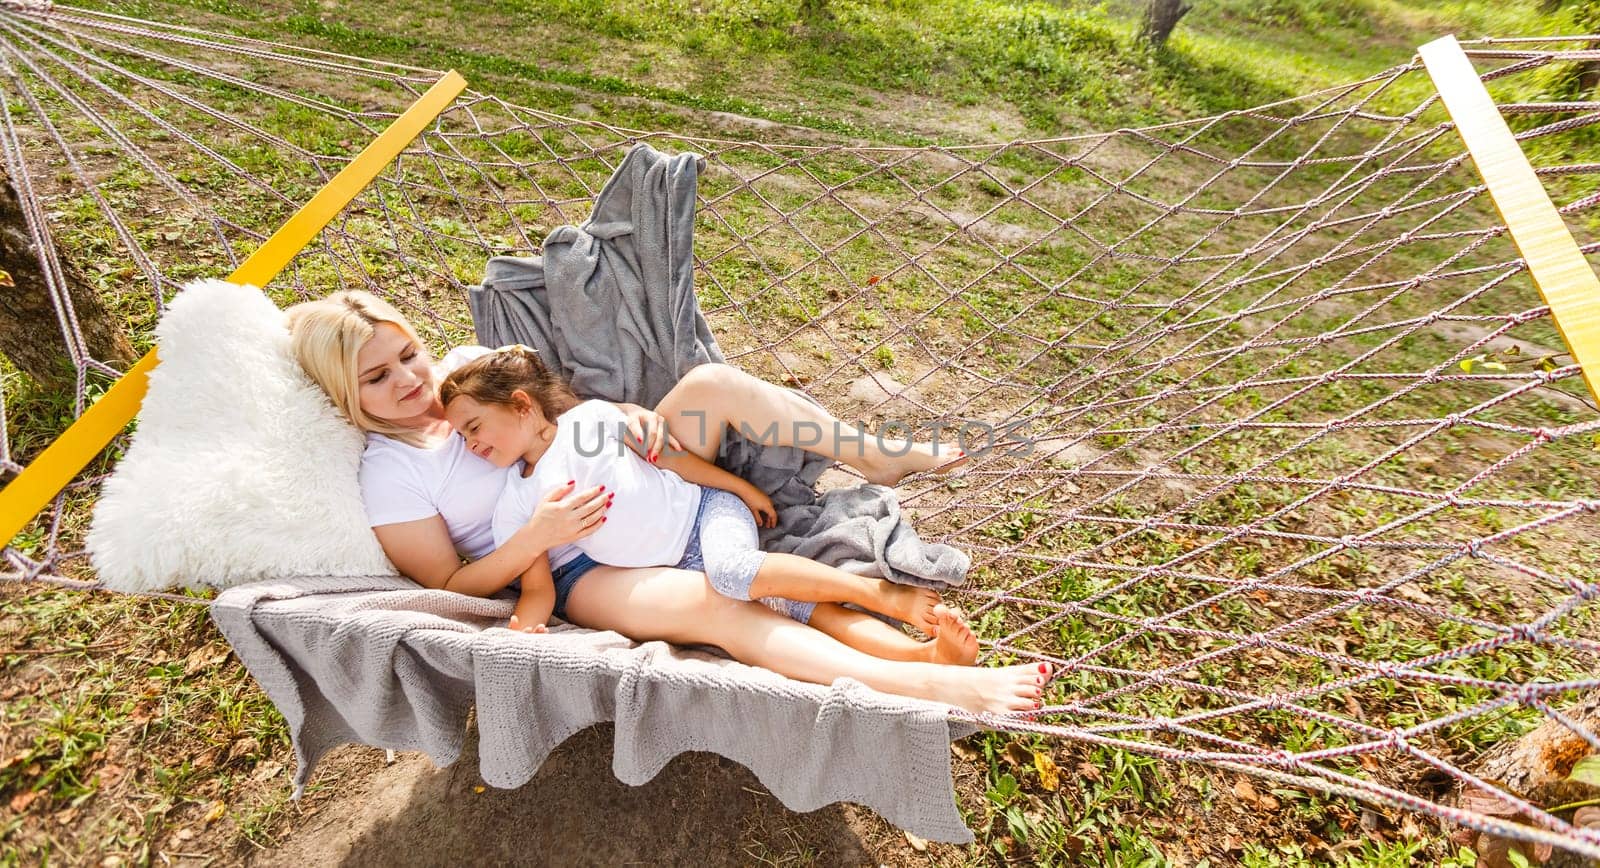 Wide view of a young mother and daughter relaxing together and smiling sitting in a hammock, hugging and lounging during a sunny summer day in a holiday home garden with grass and trees, lifestyle by Andelov13